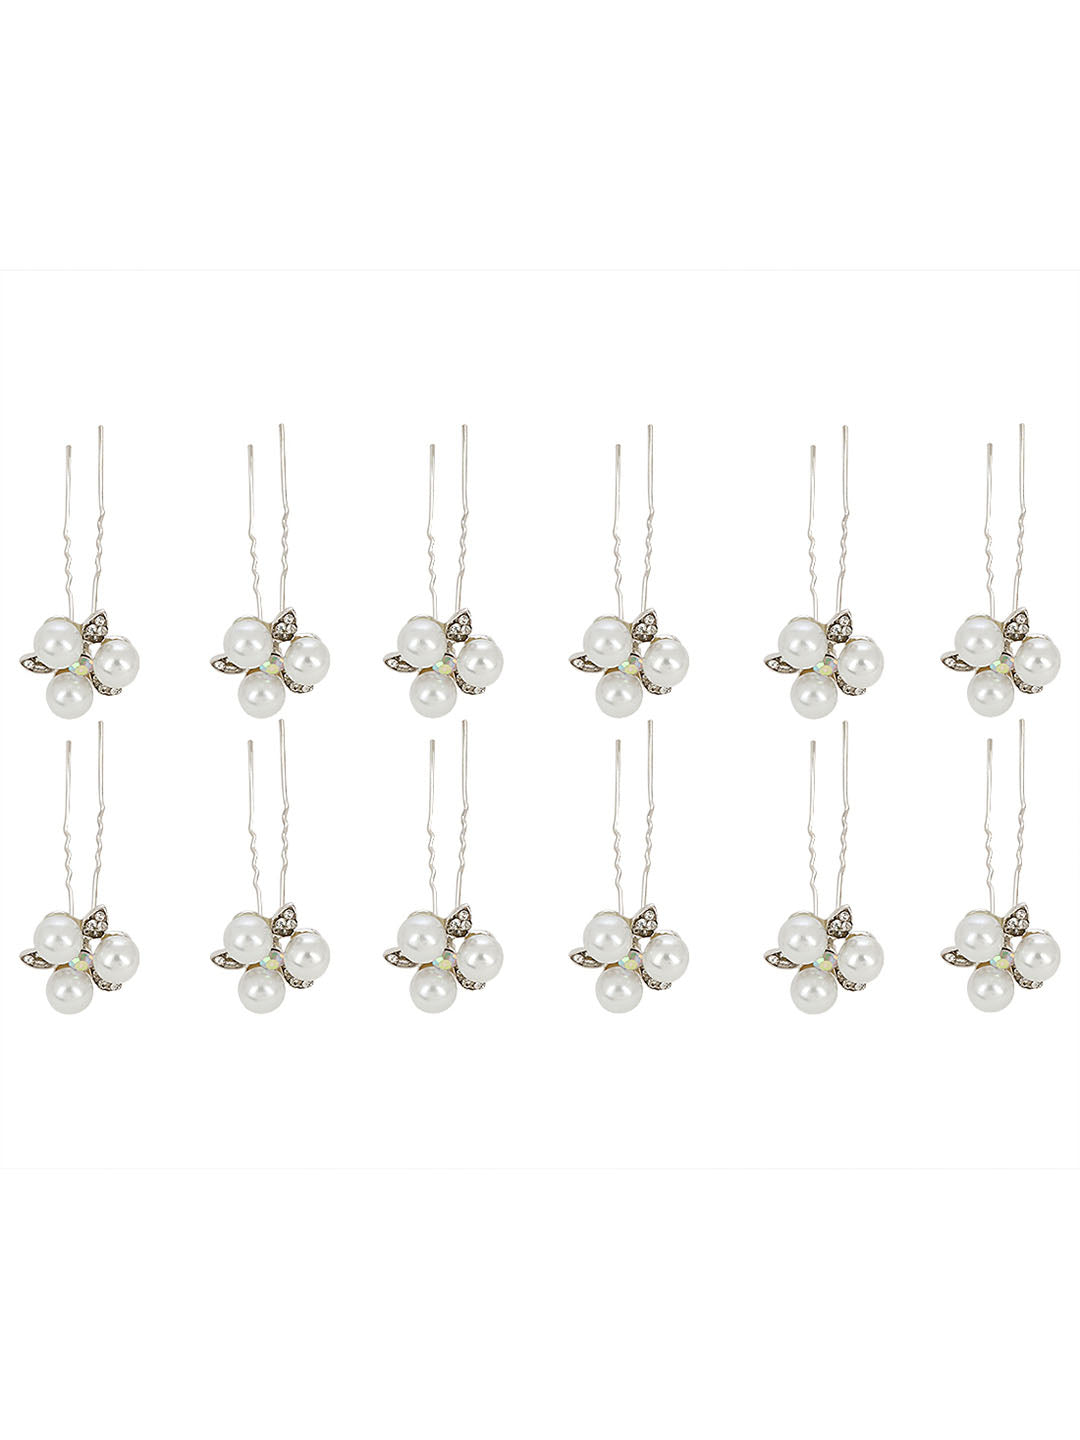 Silver Plated Pearl Juda Pin For Women & Girls (12 Pcs)